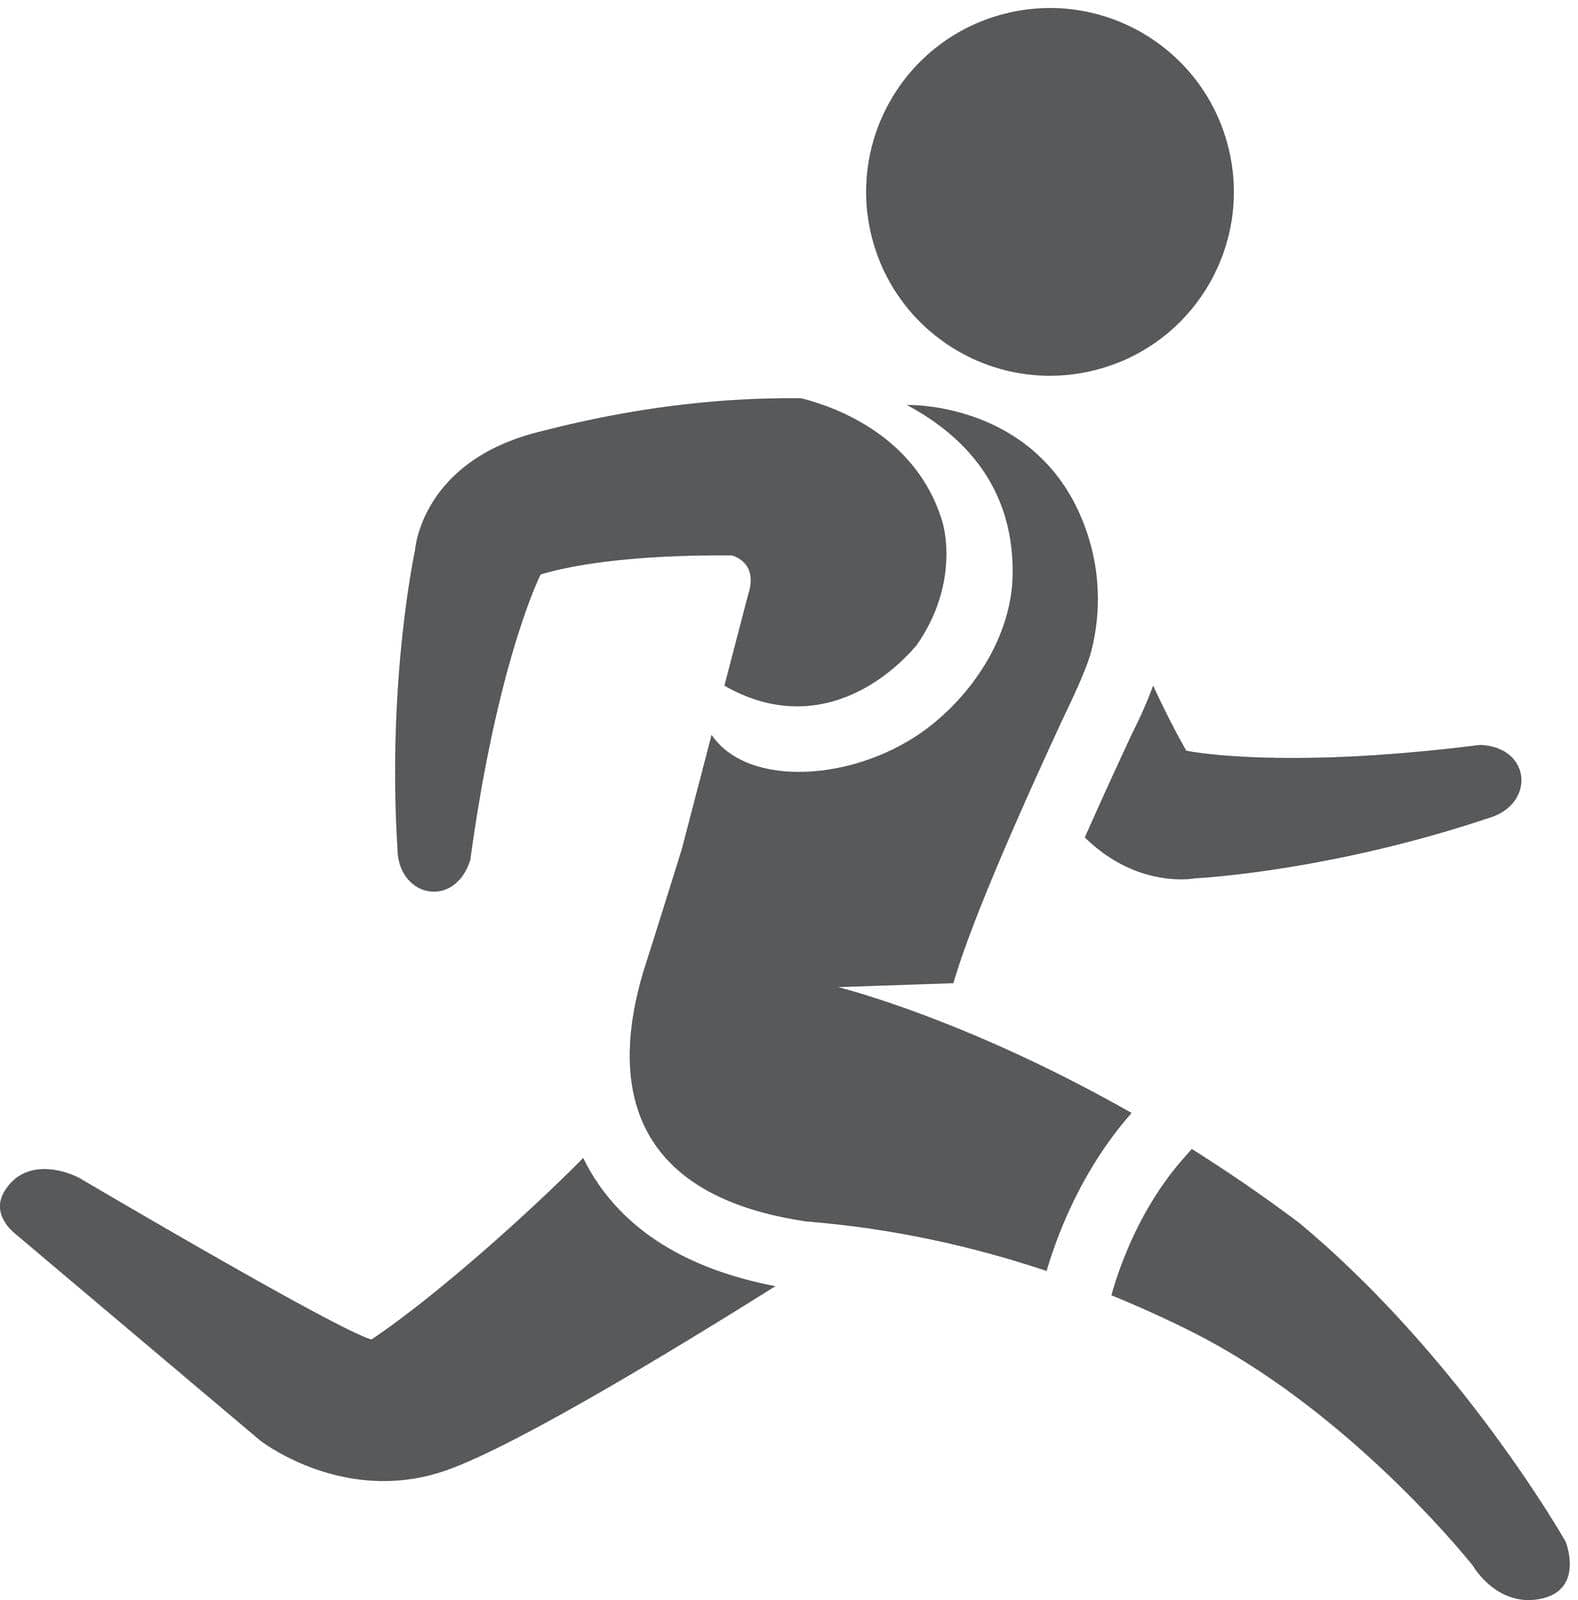 BW icon - Running athlete by puruan